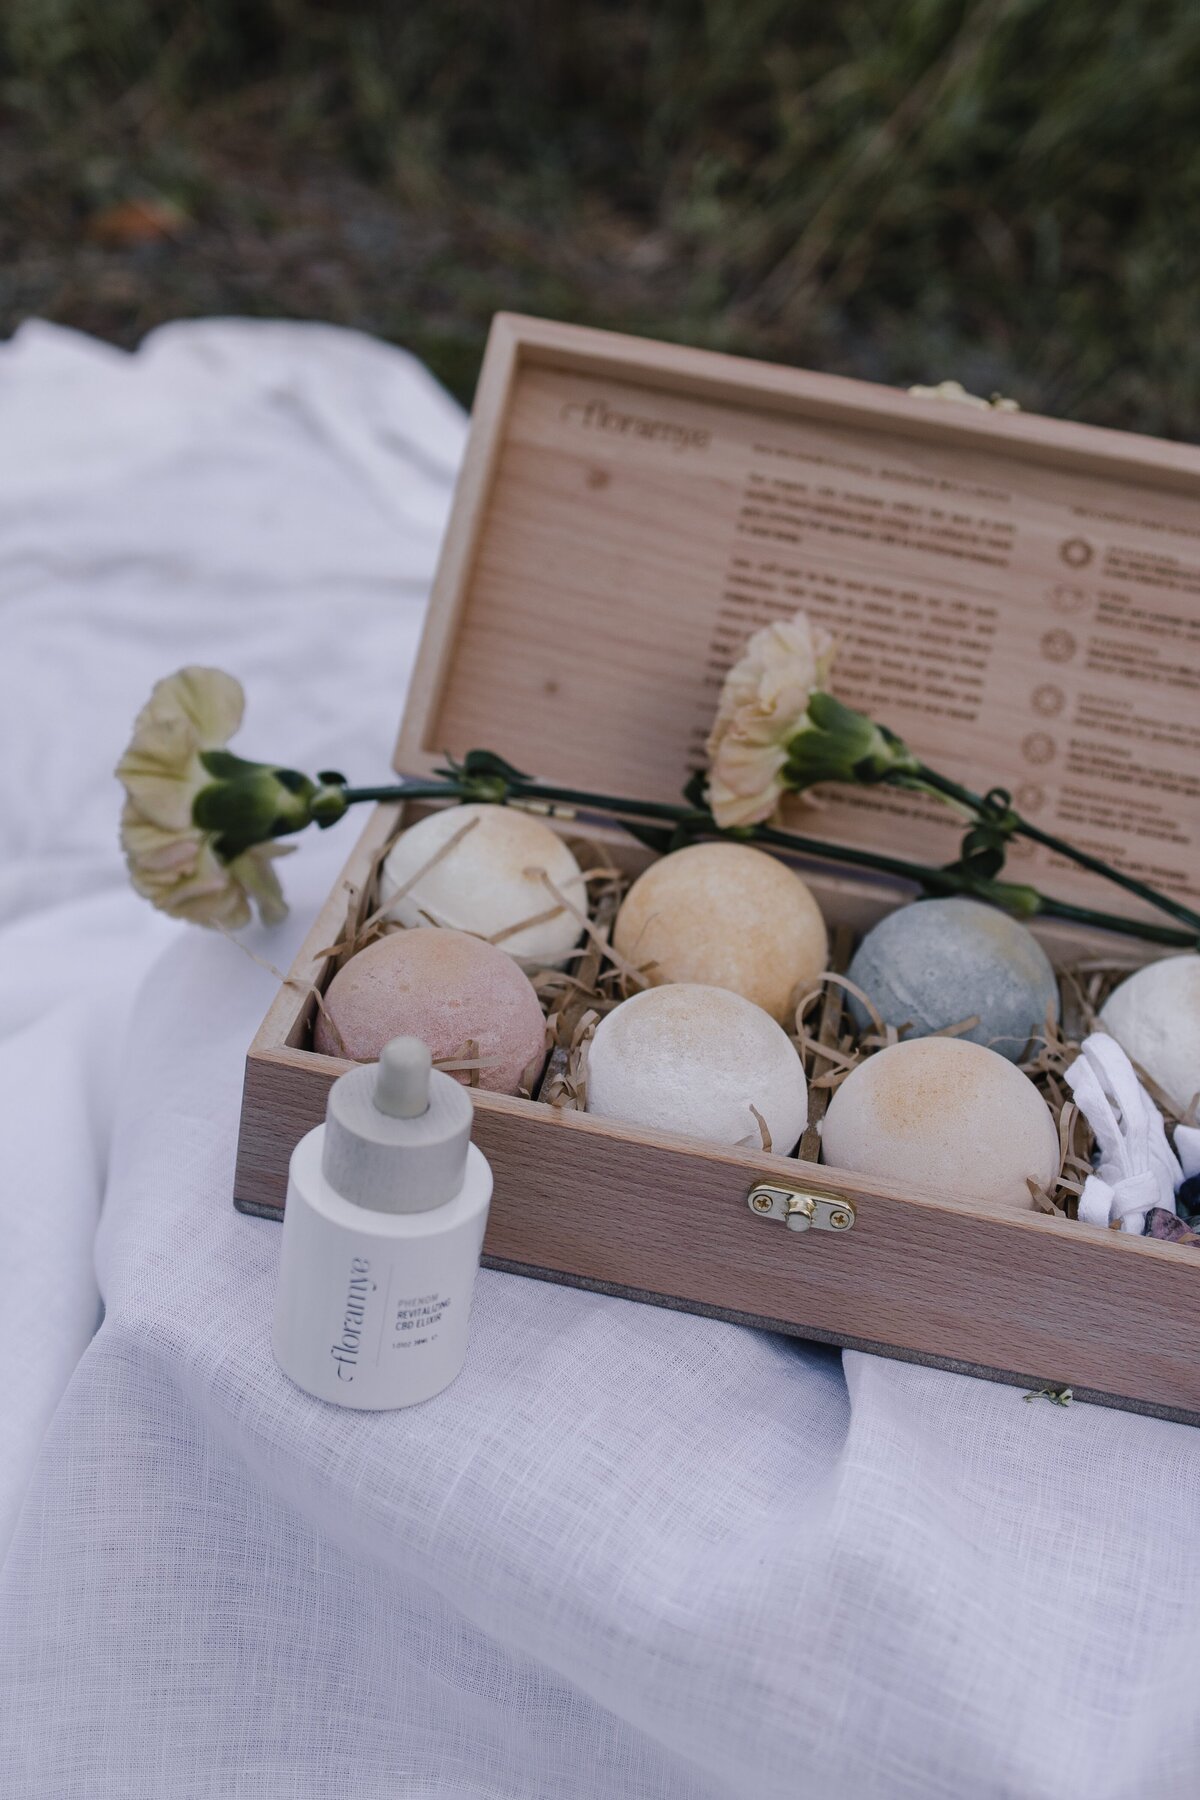 Lake Luisa CBD bath bombs product and lifestyle photography shoot by Alex Perry 